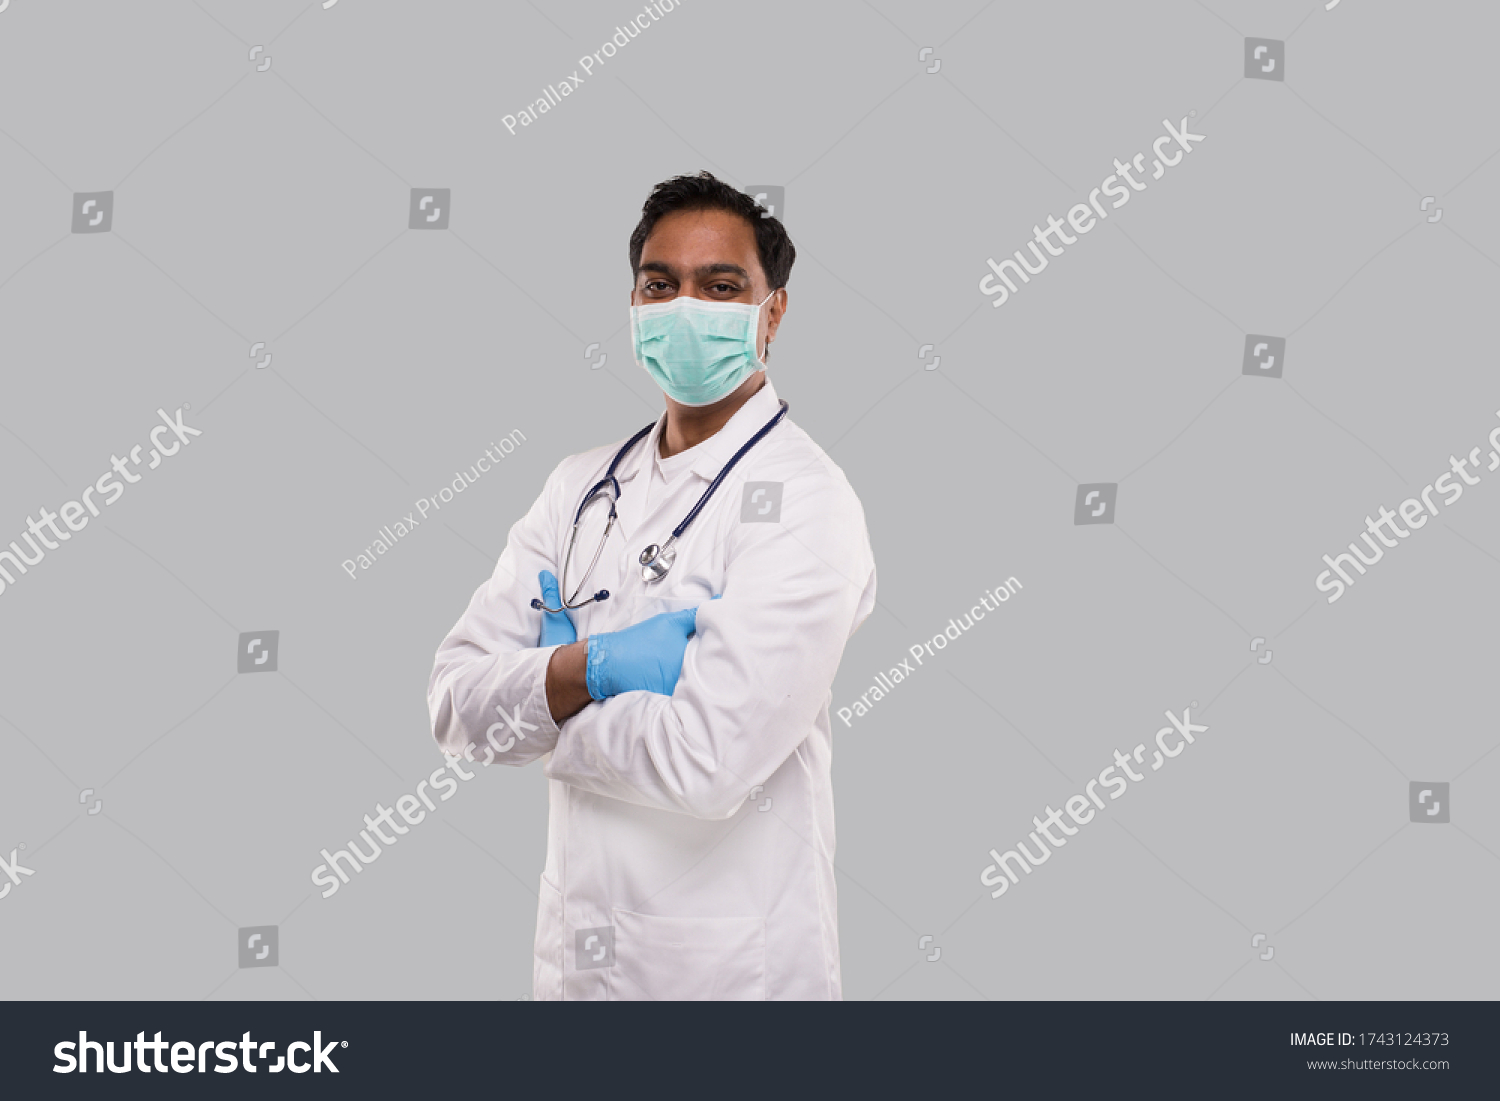 Doctor Wearing Medical Mask and Gloves Isolated. Indian Man Doctor Hands Crossed Medical Concept. Side View #1743124373